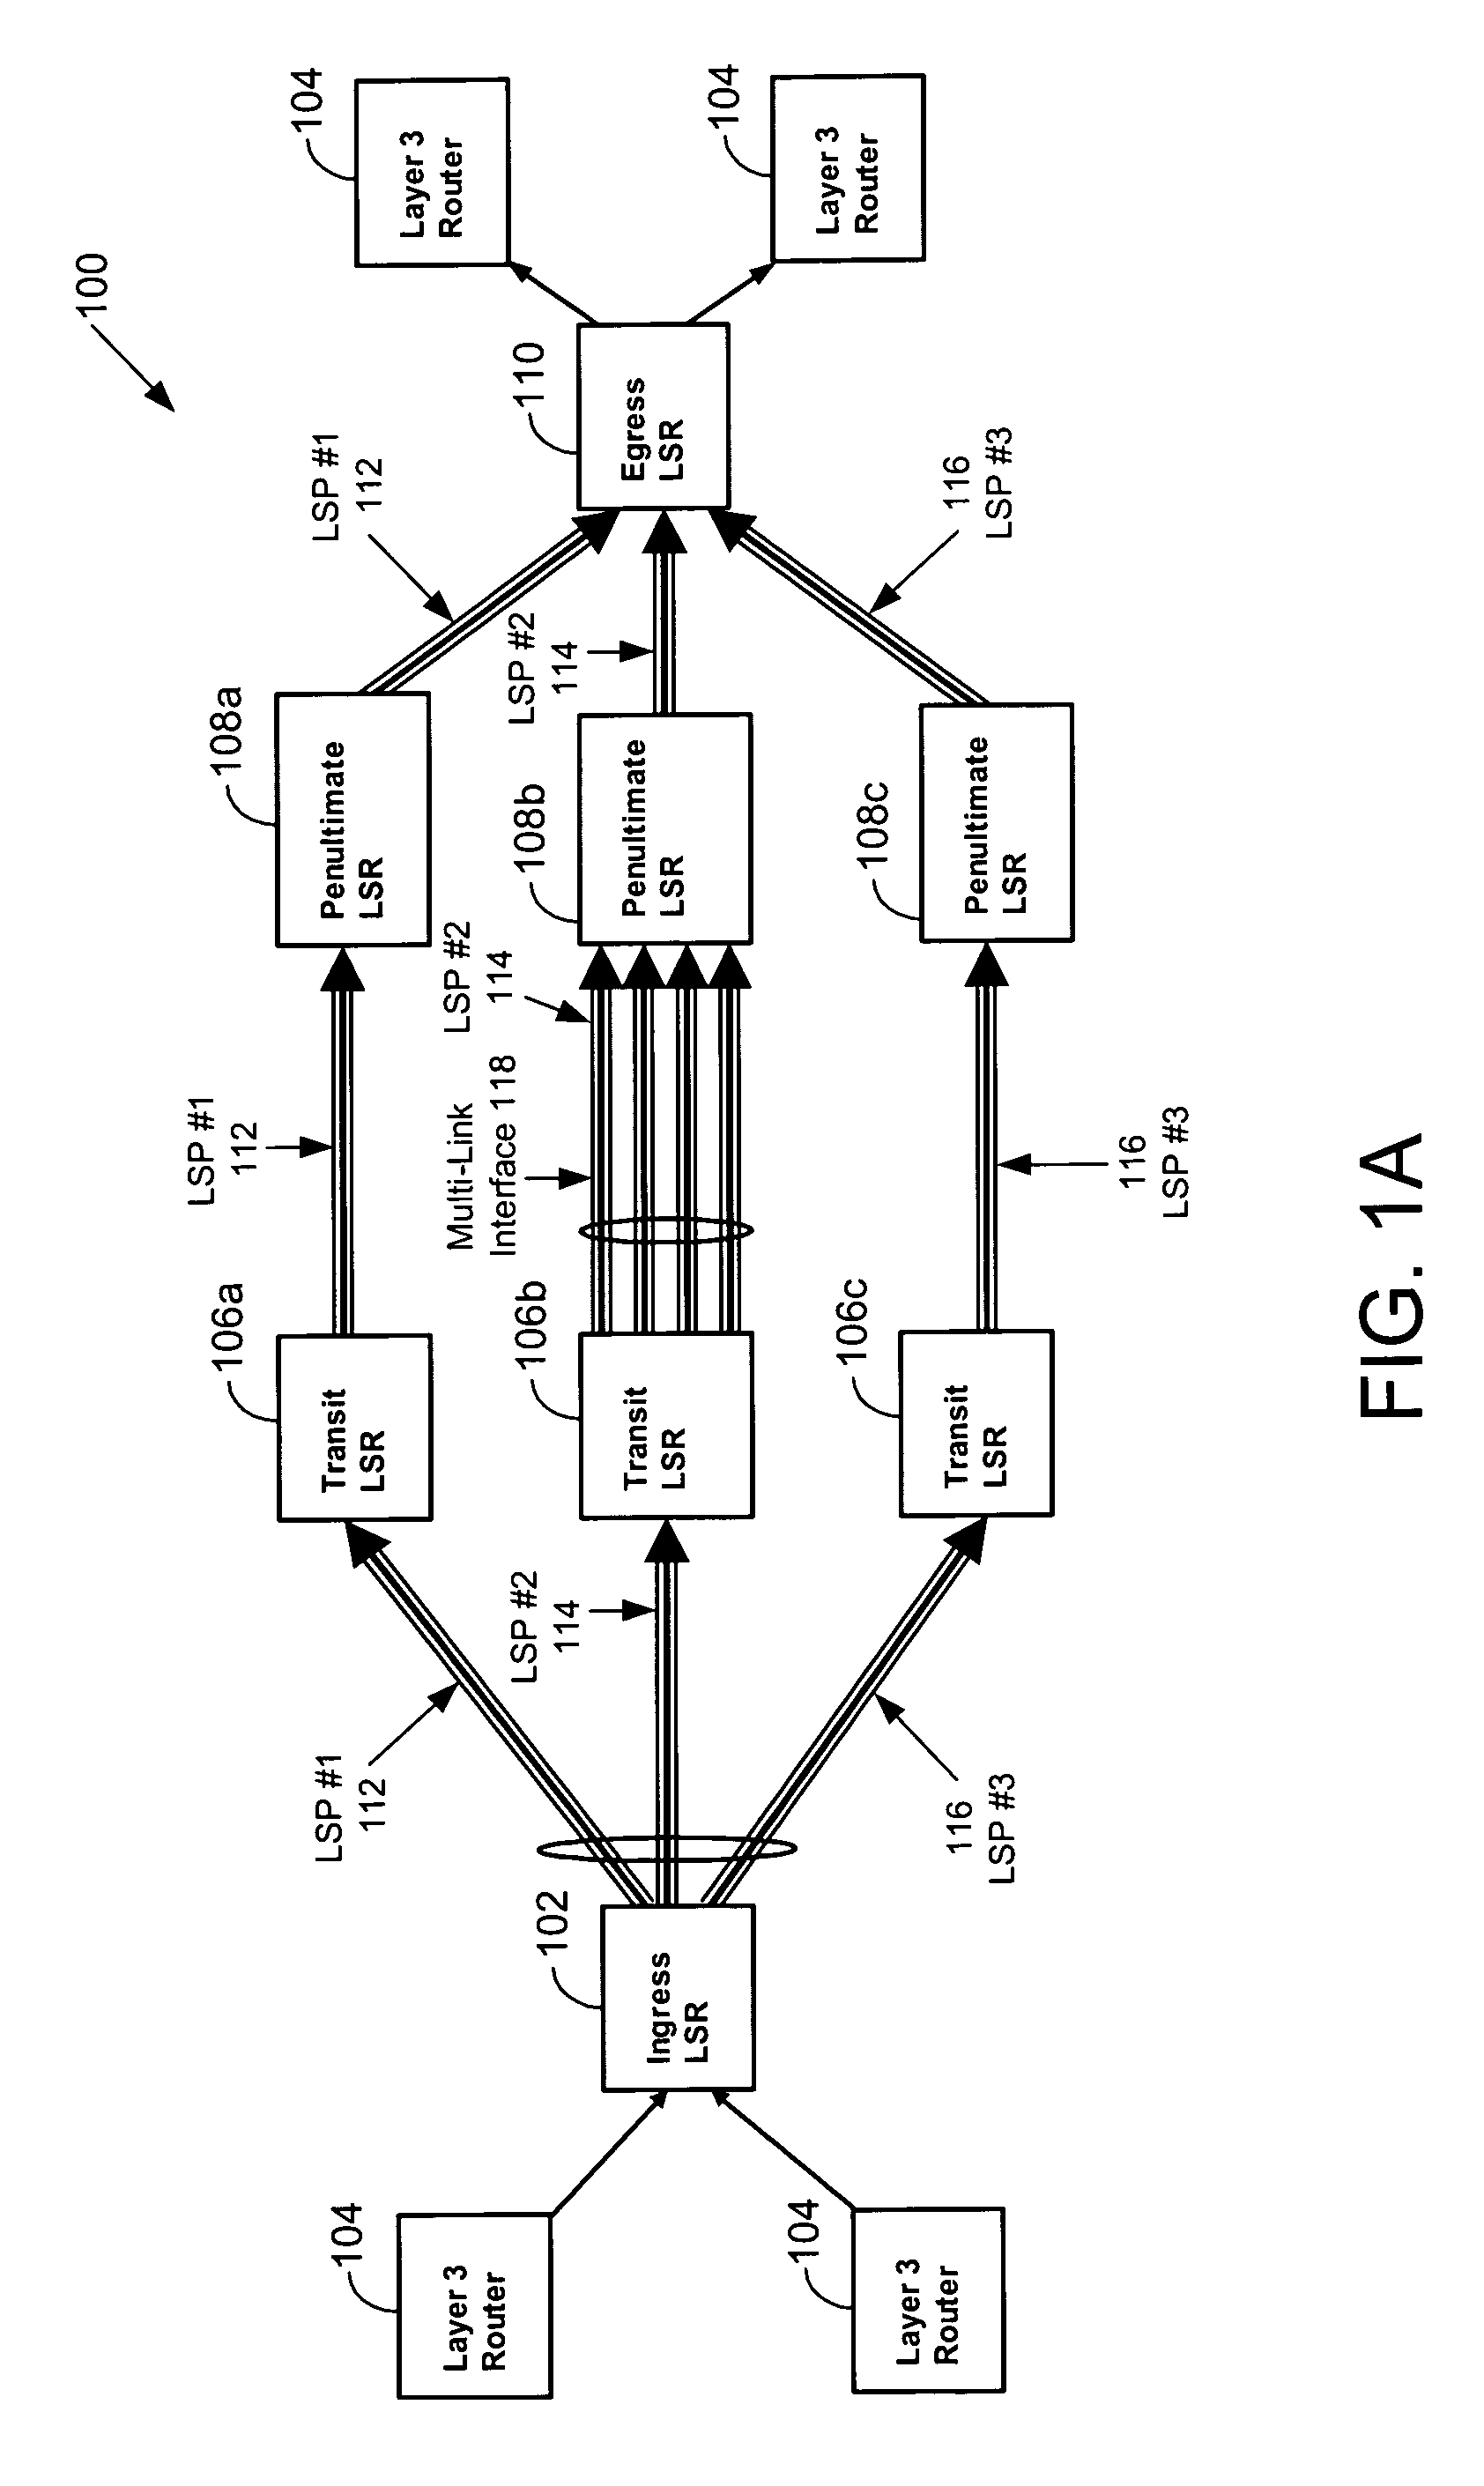 System and method for network tunneling utilizing micro-flow state information